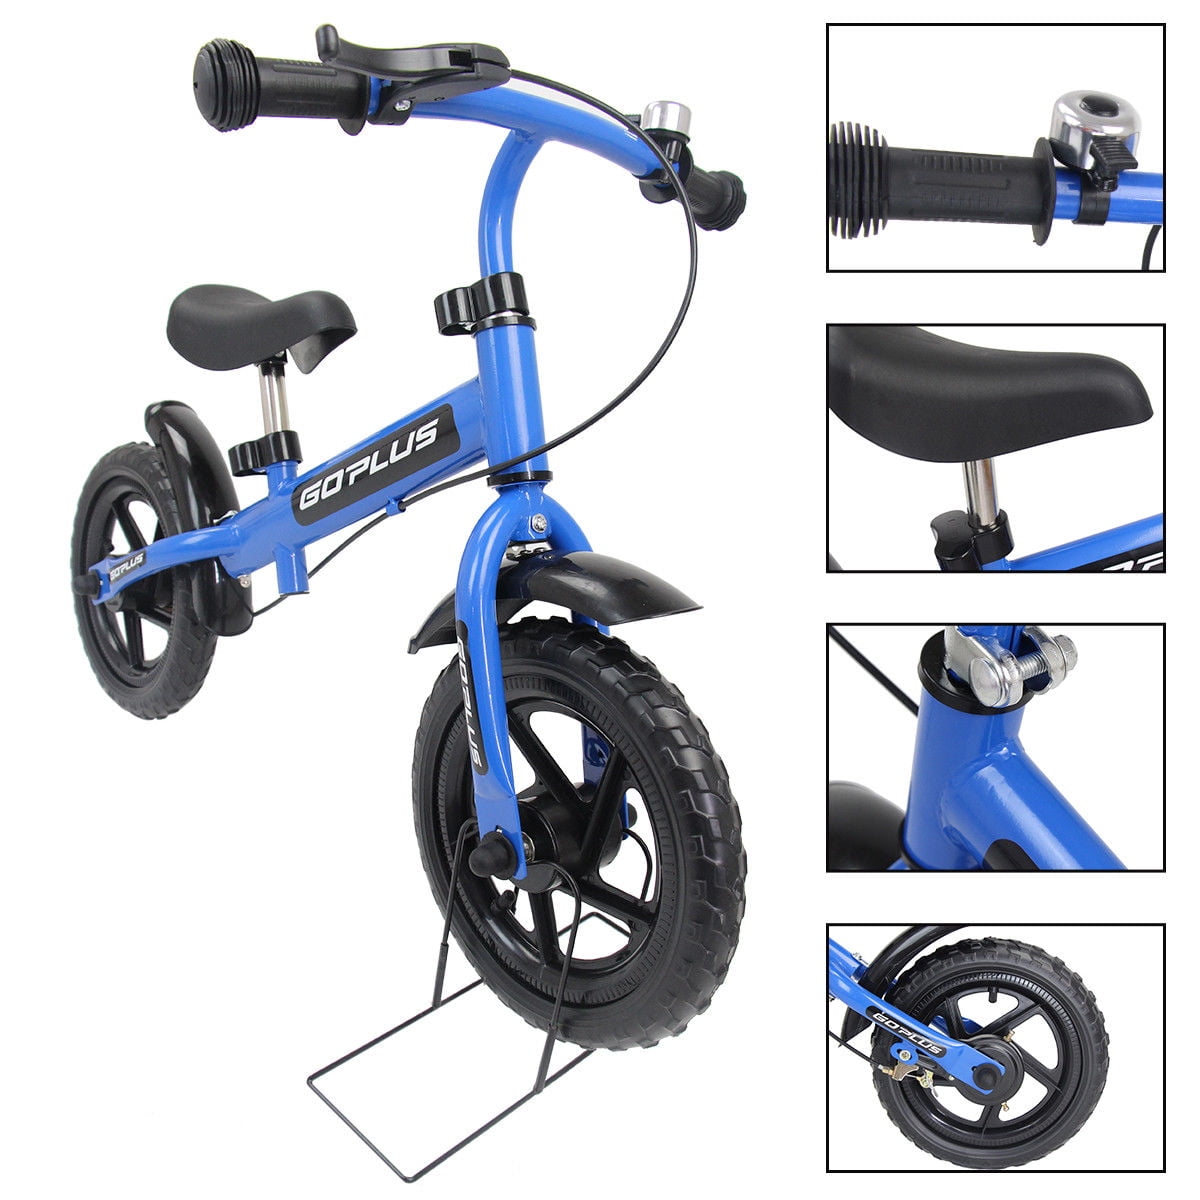 12/" Kids Bike Bicycle Scooter Training Exercise Balance W// Brakes Bell 4 Colors